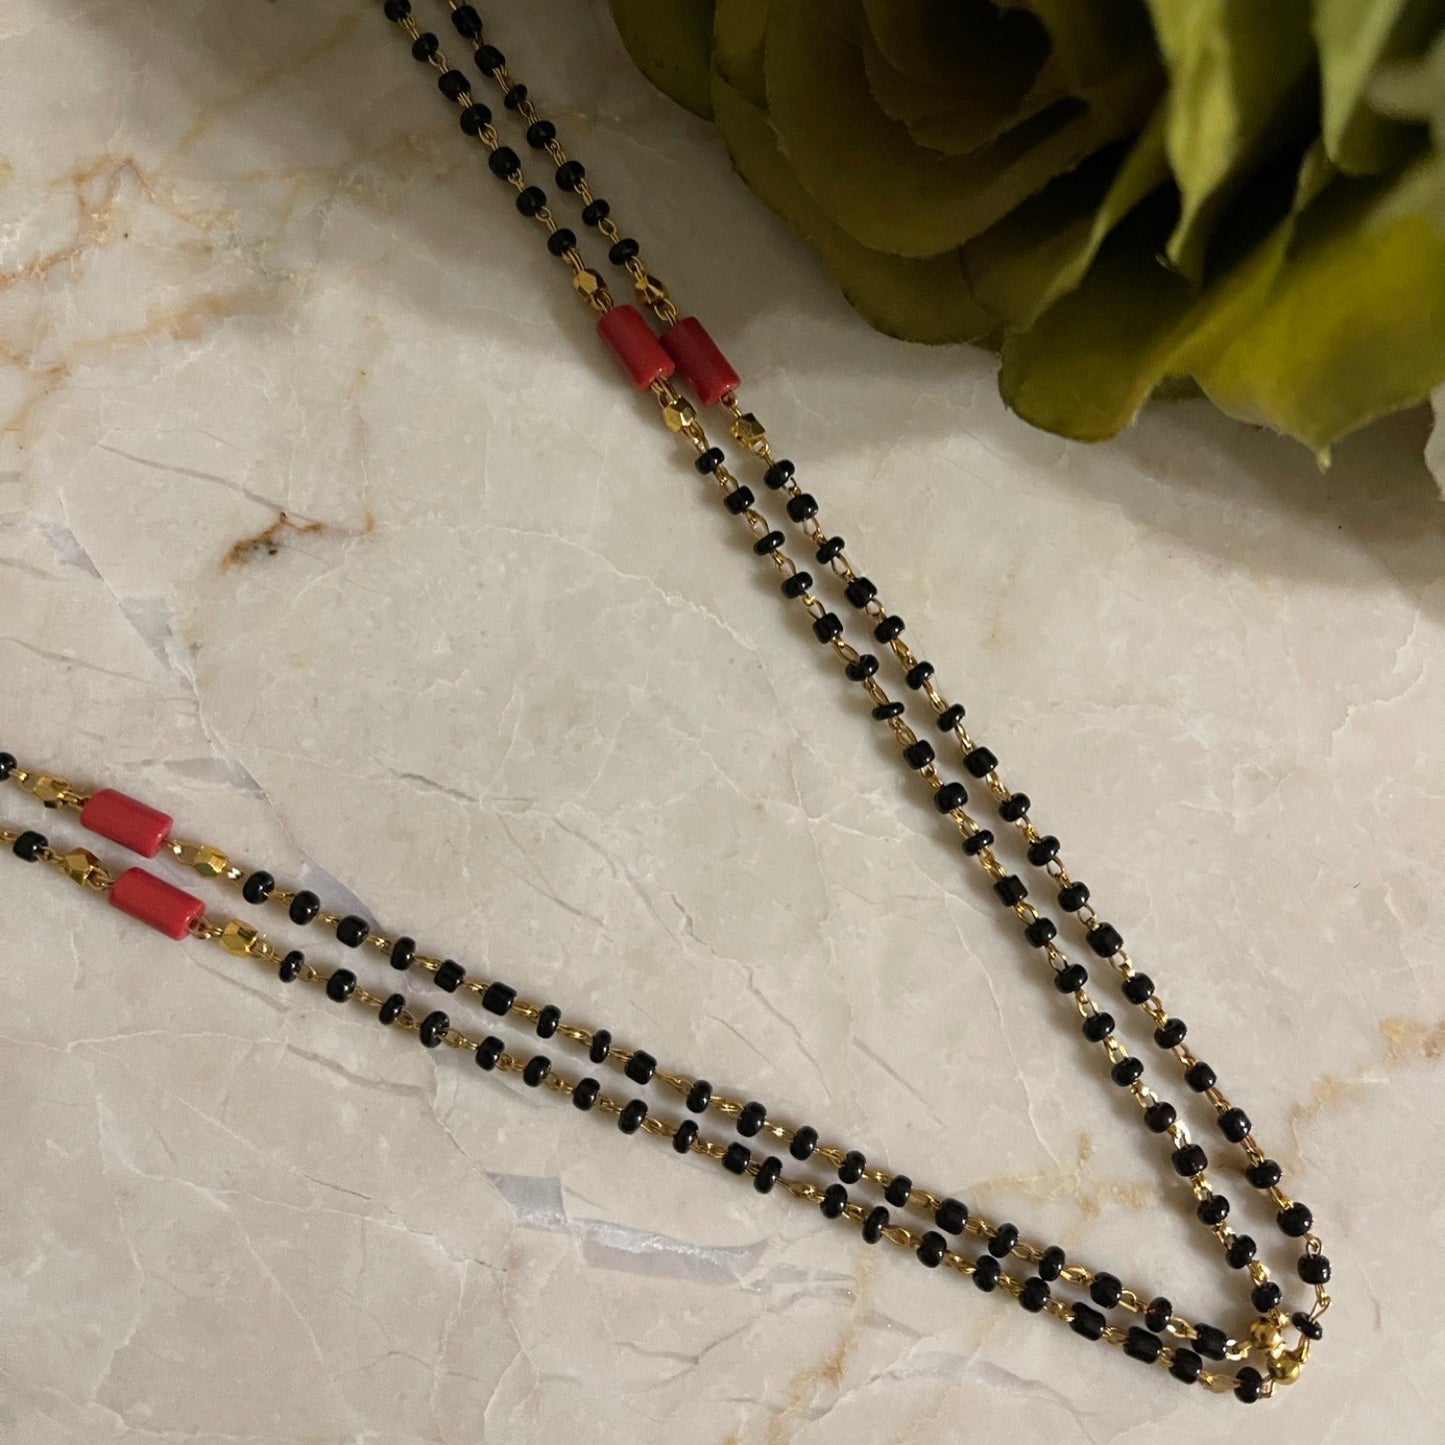 Gold Plated Traditional Long Mangalsutra Designs Double Line Red And Black Beads Chain